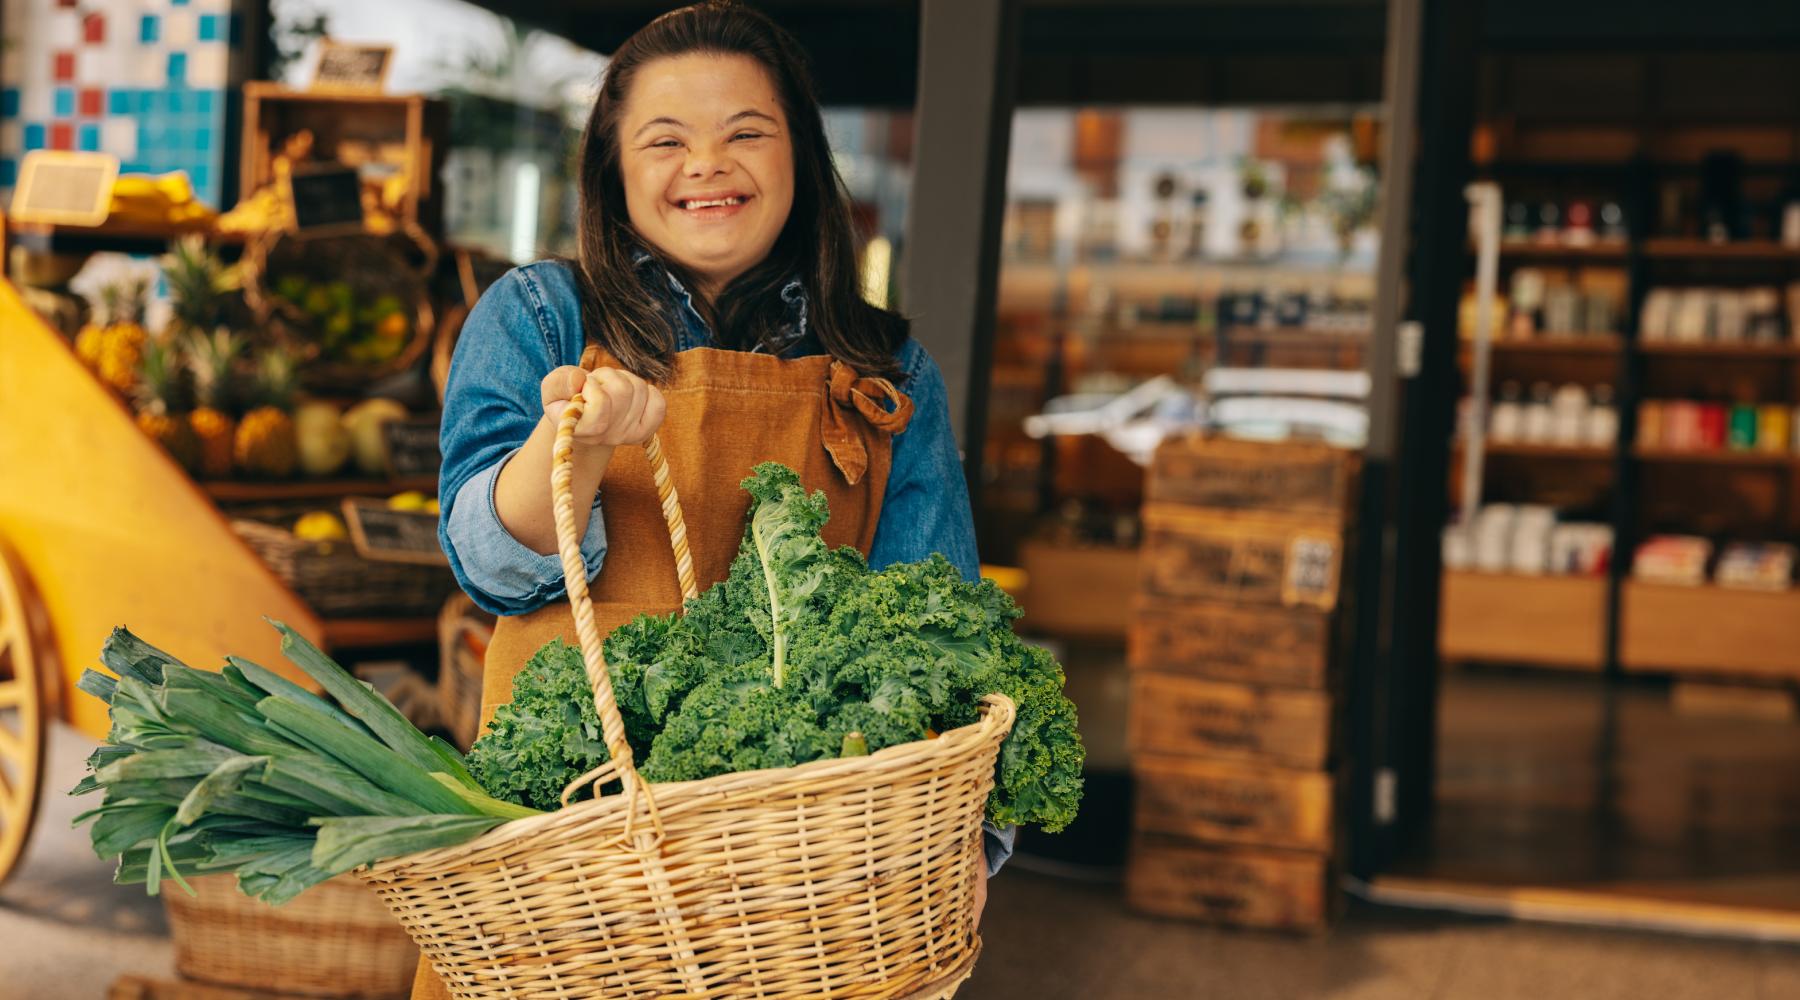 Woman with down syndrome in holding groceries